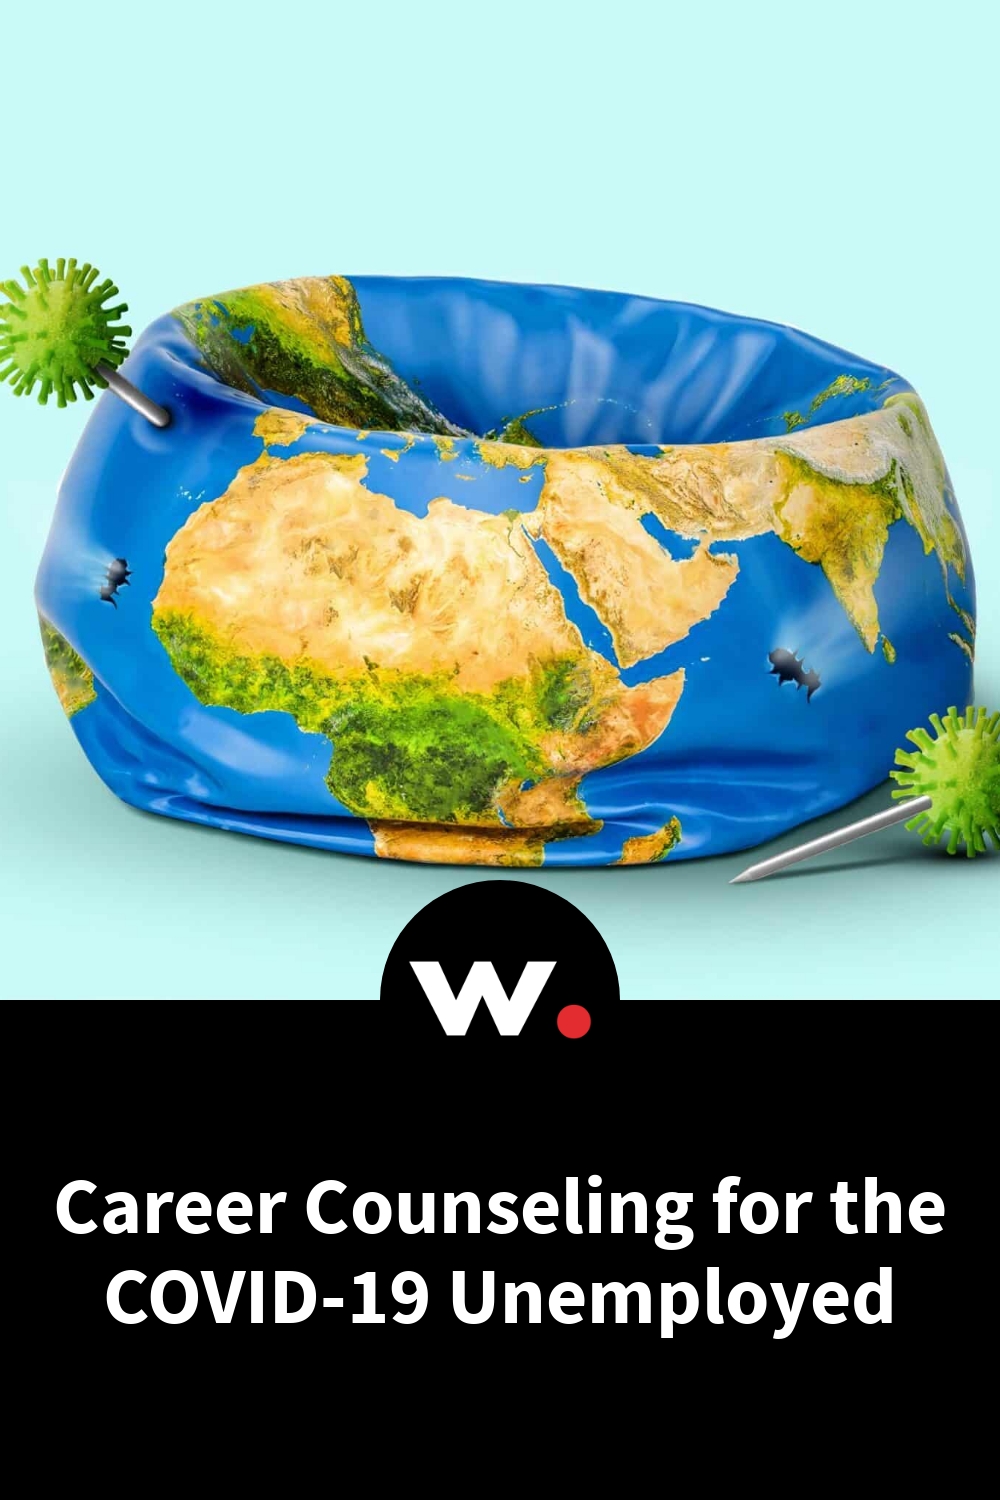 Career Counseling for the COVID-19 Unemployed